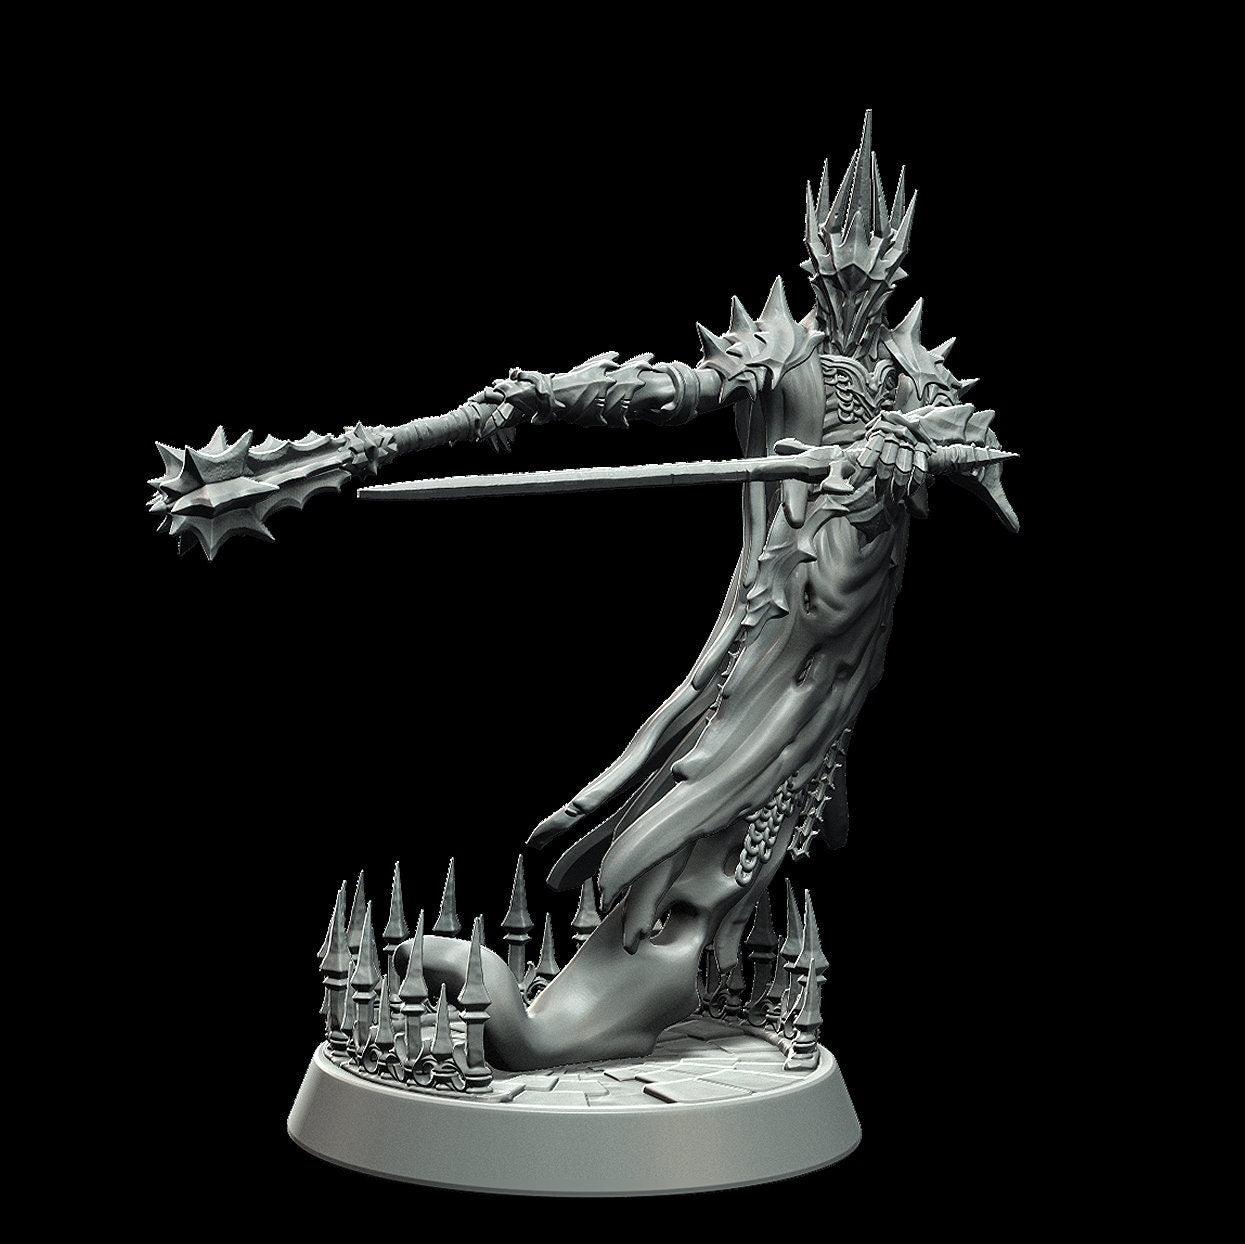 Fallen Wraithlord Miniature Undead miniature - 3 Poses - 28mm scale Tabletop gaming DnD Miniature Dungeons and Dragons,dnd 5e - Plague Miniatures shop for DnD Miniatures